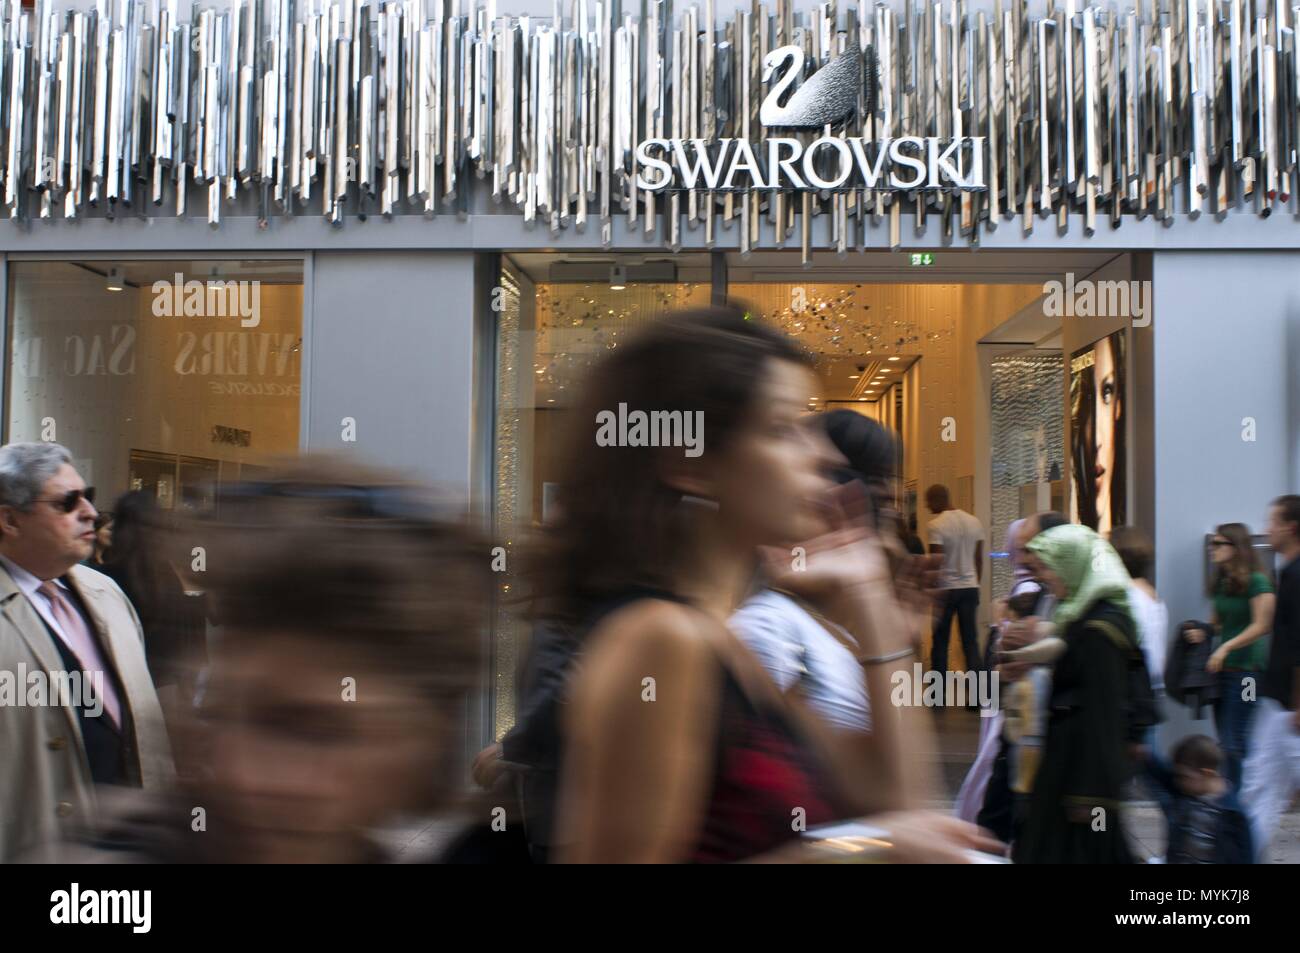 Swarovski sign with swan logo on shop in Brussels, Belgium. Rue Neuve, New  Street, Brussels, Belgium. Comercial area. January 2018 | usage worldwide  Stock Photo - Alamy